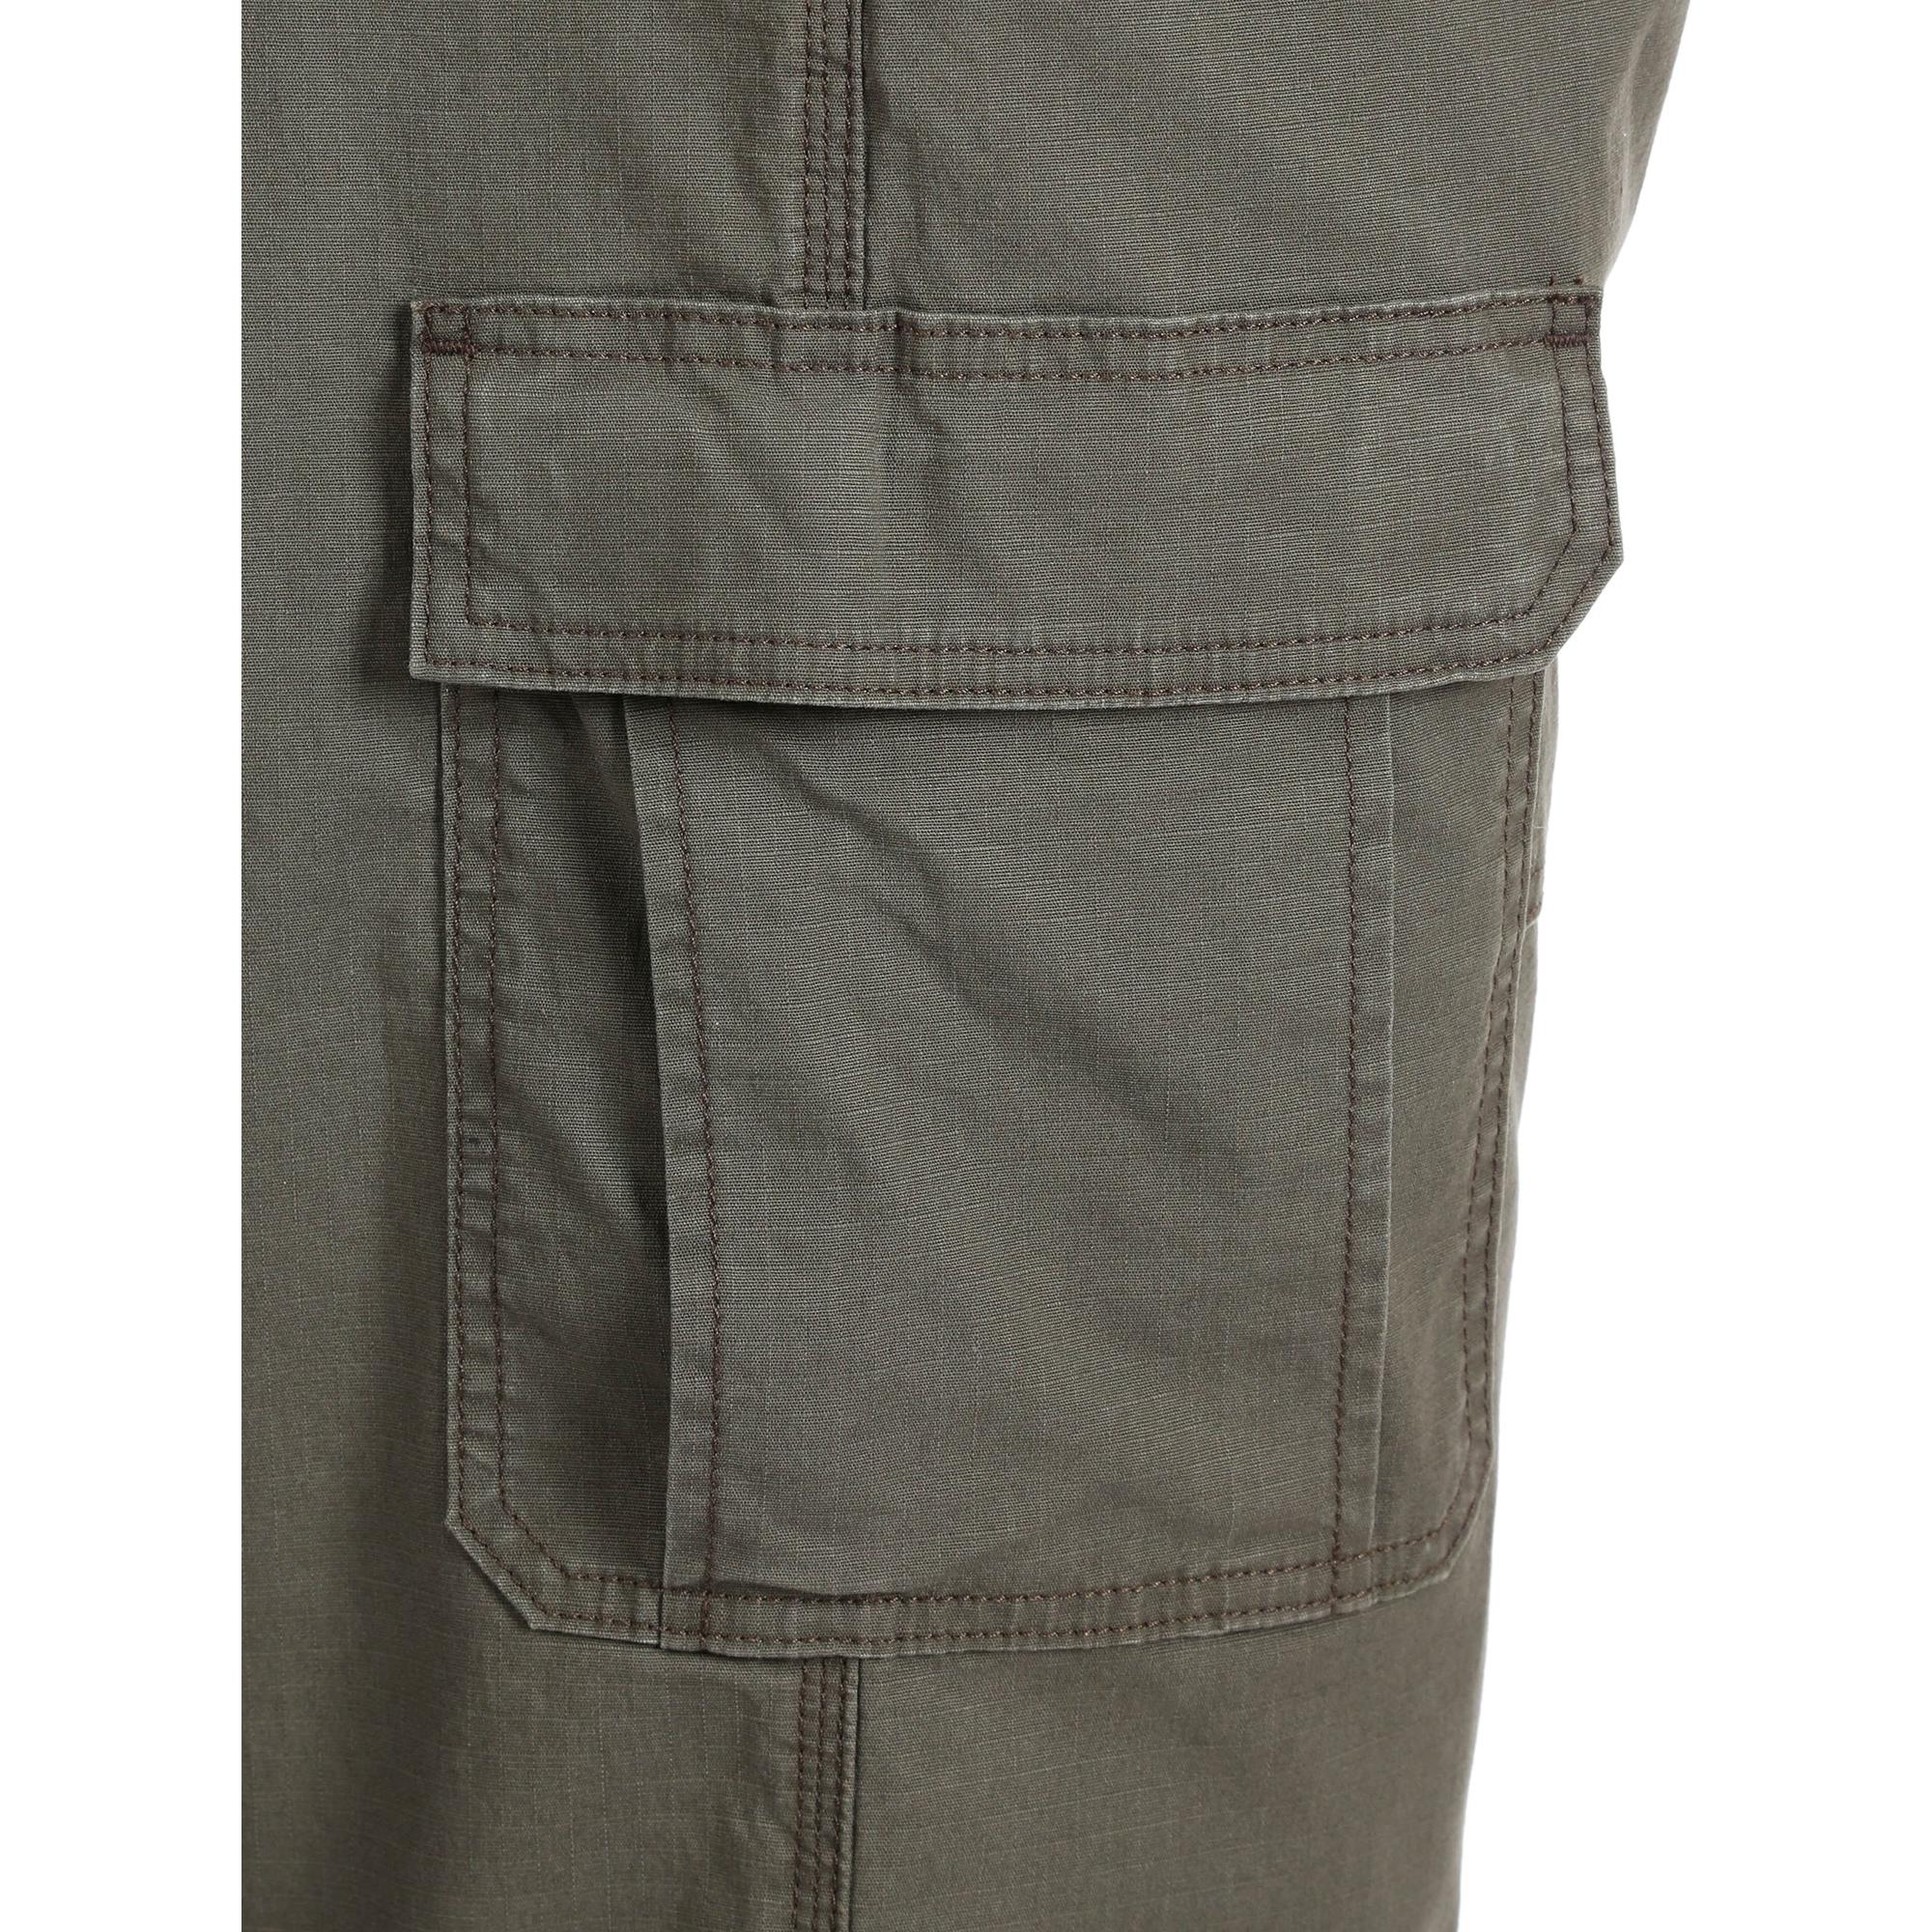 Find Your Perfect Wrangler Men's and Big Men's Relaxed Fit Cargo Pants ...